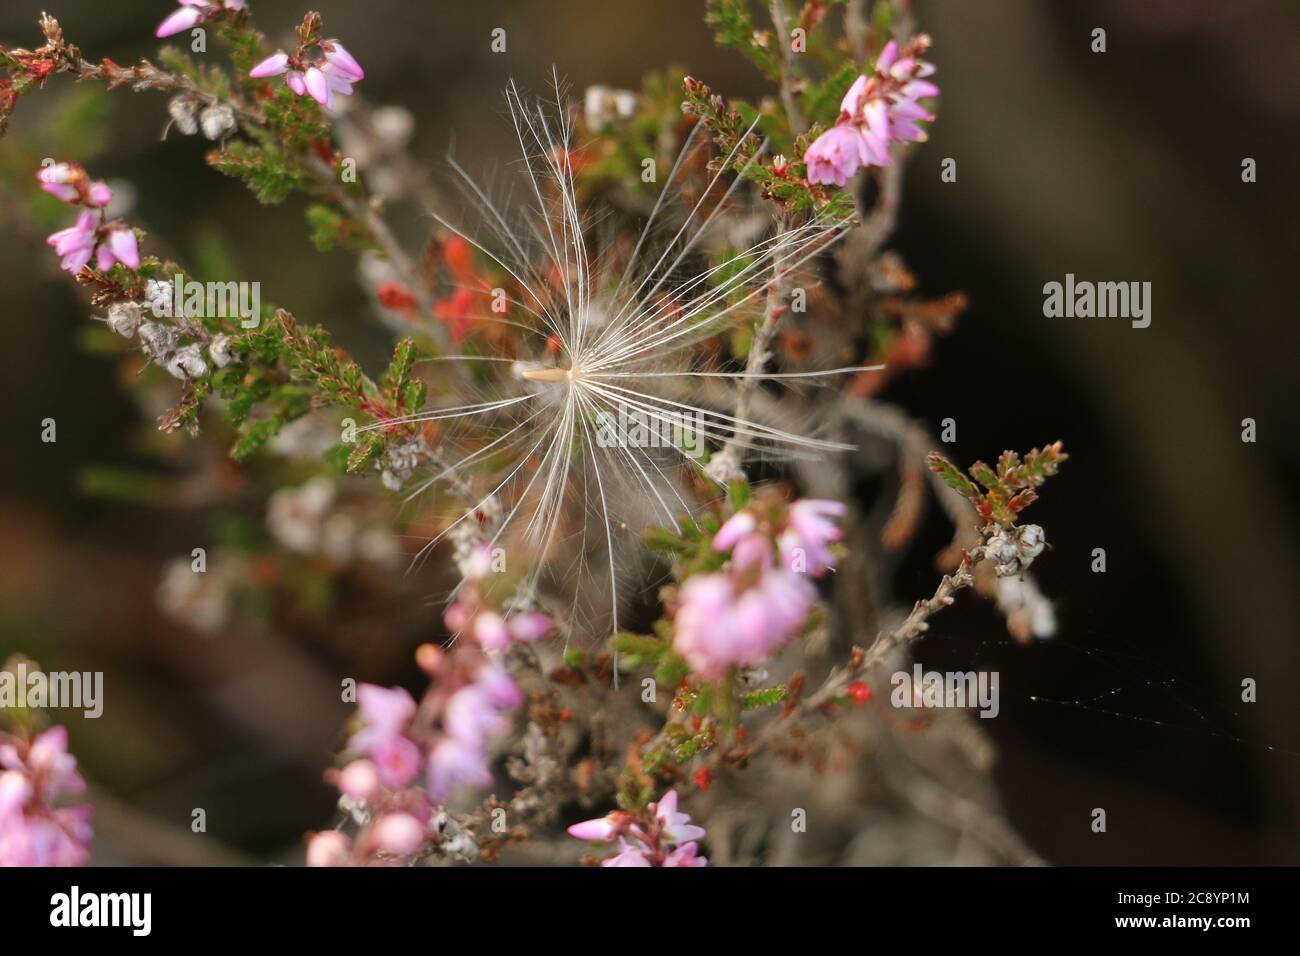 Close-up view of a dandelion seed pappus, Taraxacum officinale, caught in a pink heather plant, Calluna vulgaris. Seed dispersal. Stock Photo